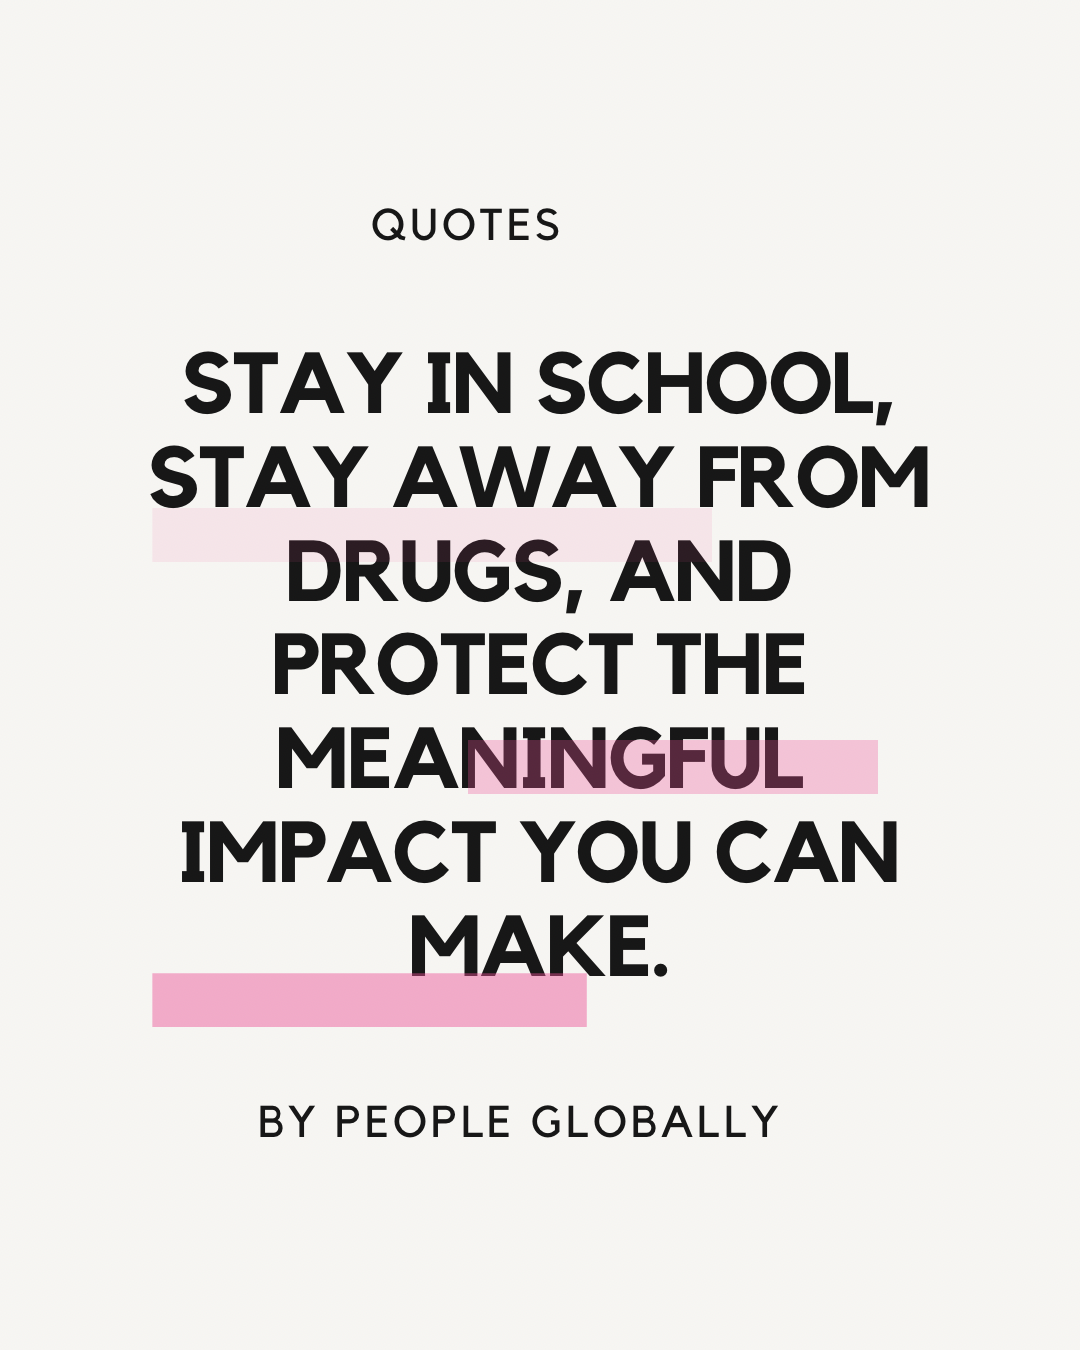 Stay in school, stay away from drugs, and protect the meaningful impact you can make.